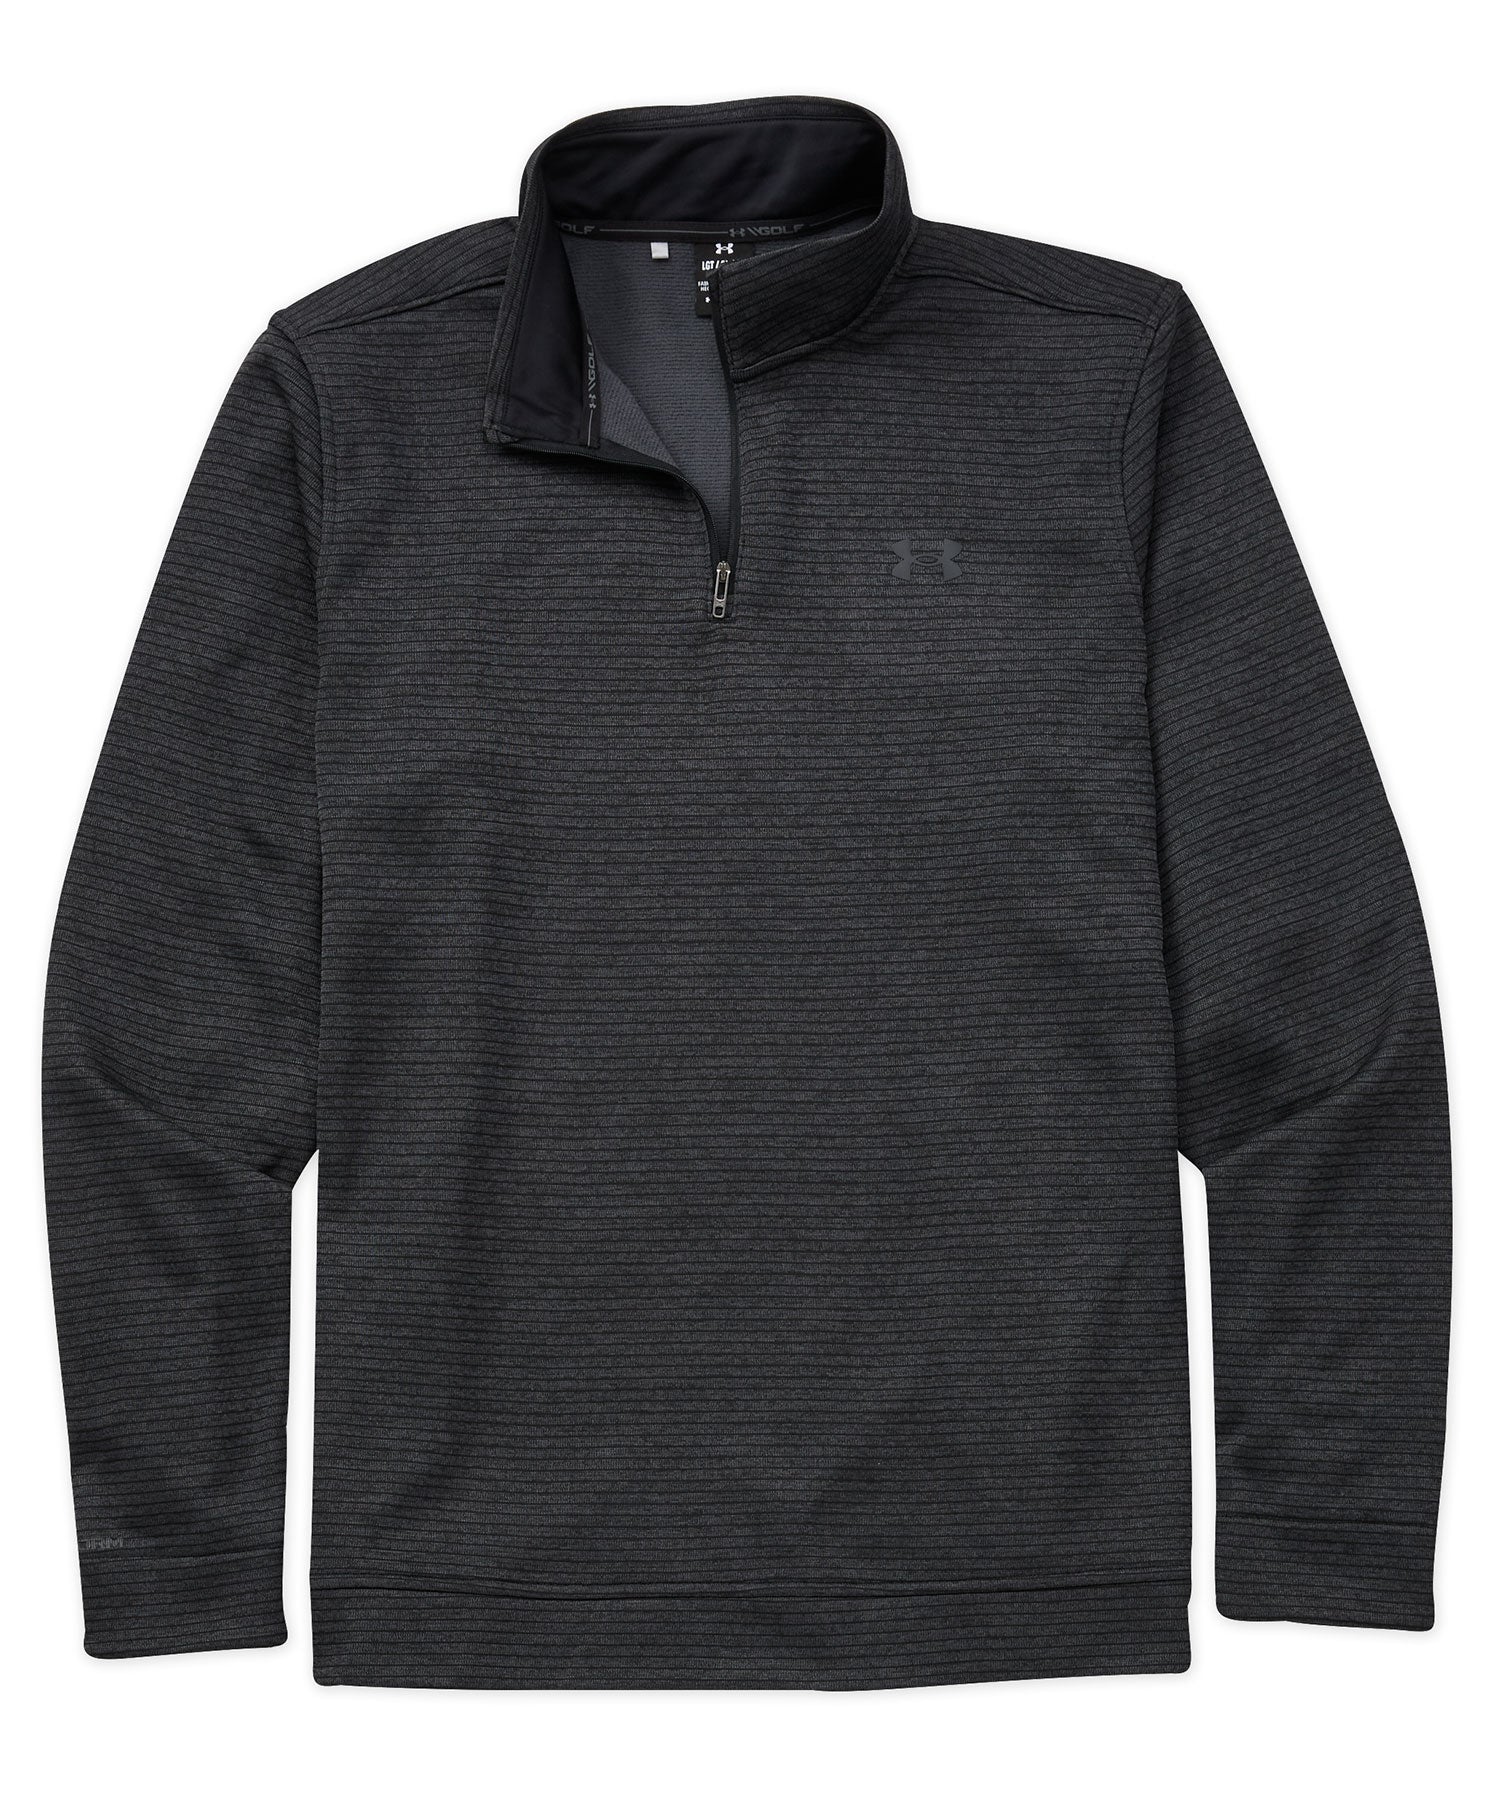 Maglione in pile Under Armour 1/4 Zip